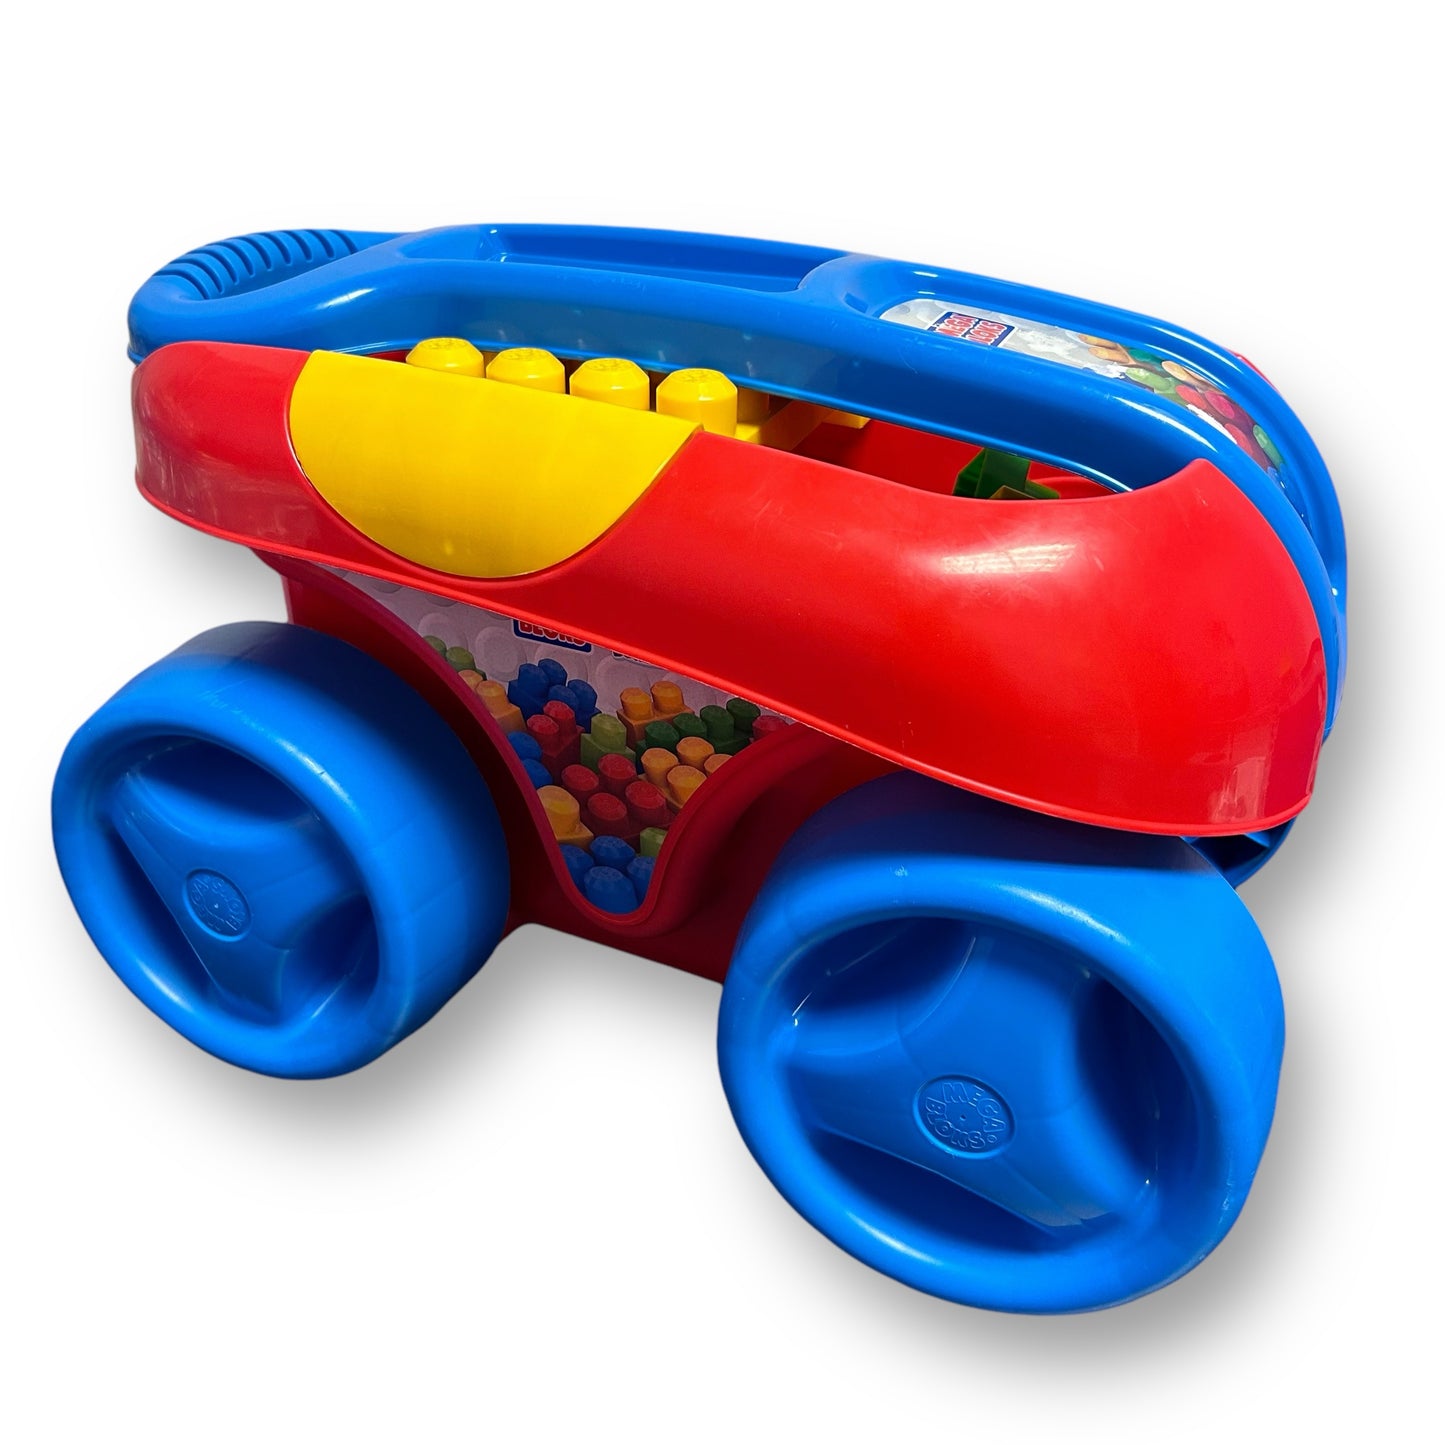 Mega Bloks First Builders Red Wagon, Car, and Blocks Collection